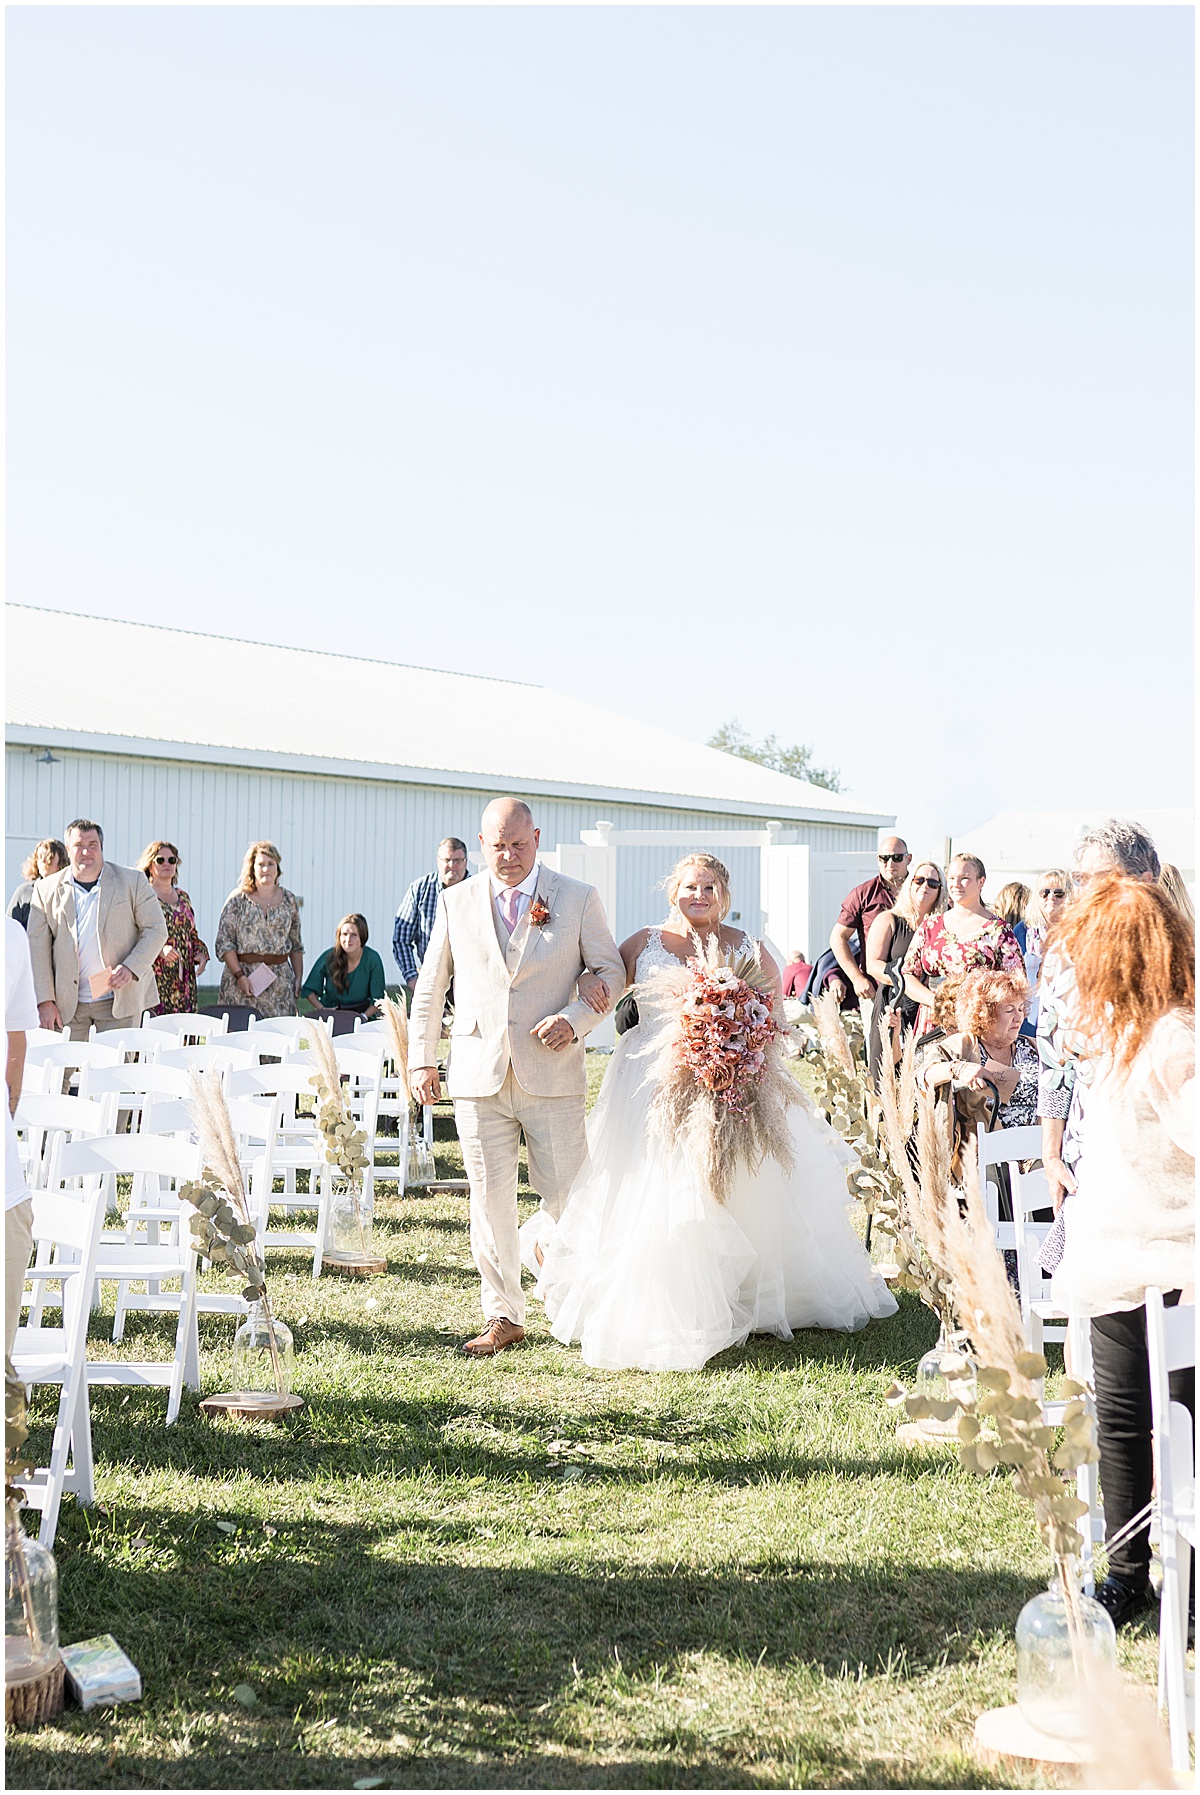 Bride walking down aisle at Miami County Fairgrounds wedding in Peru, Indiana